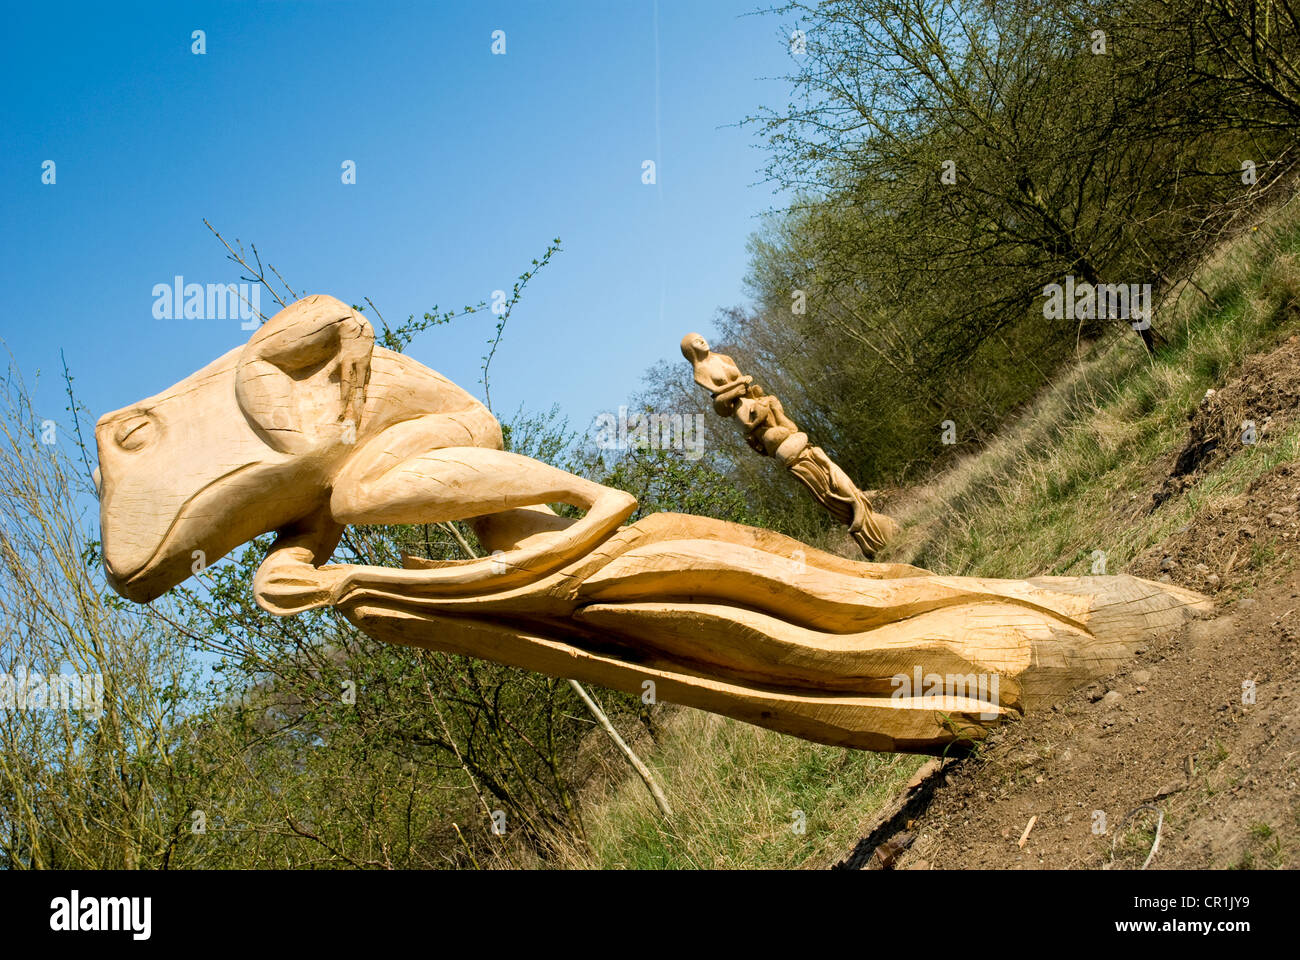 Frog sculpture at the London 2012 Olympic white water centre, Lea Valley, England Stock Photo